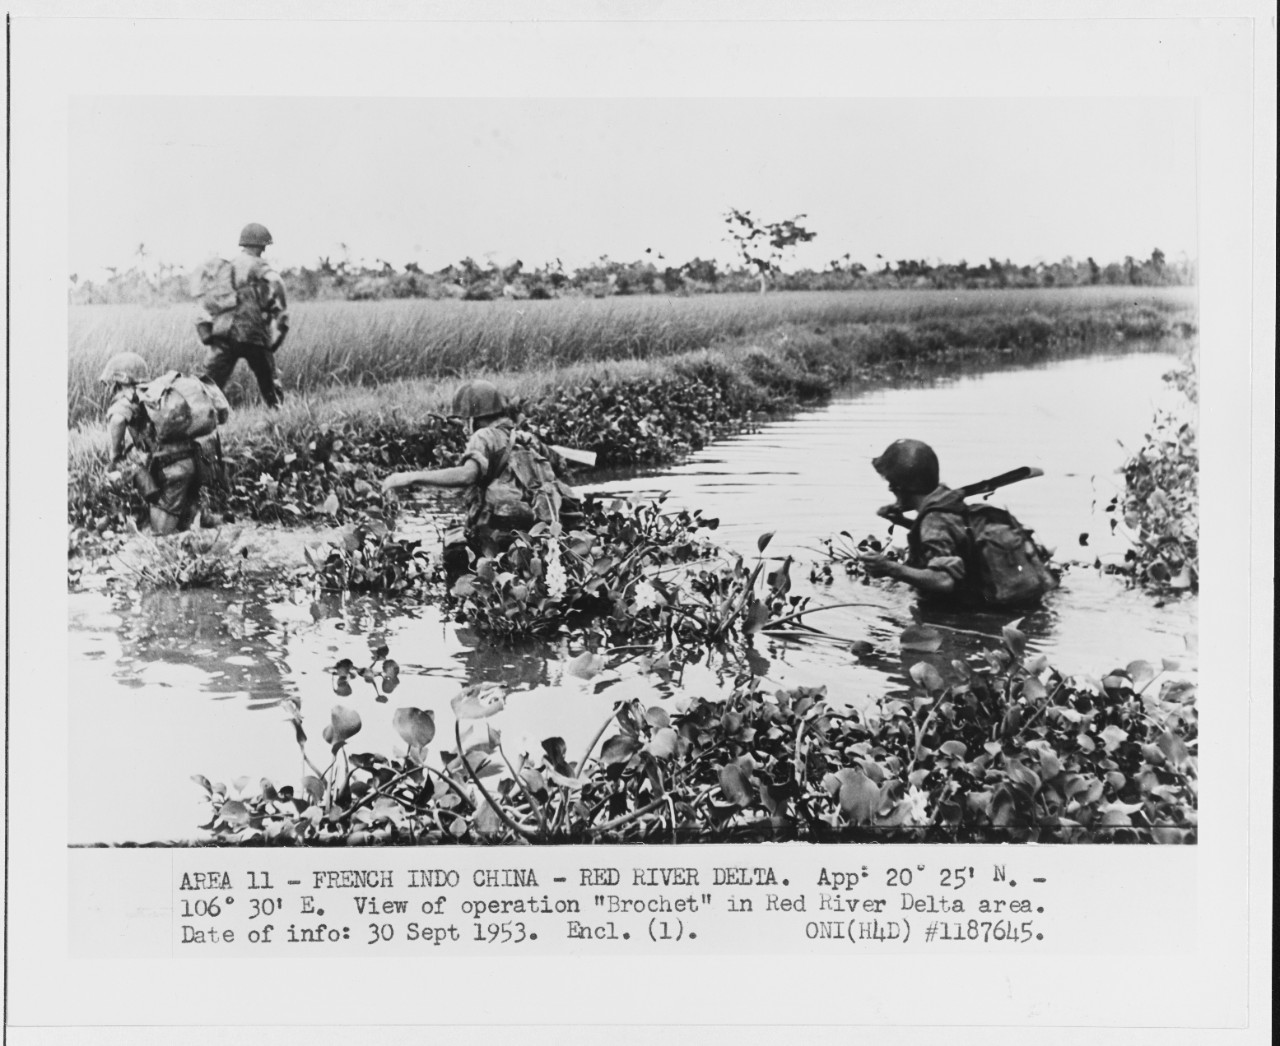 Red River Delta, French Indochina